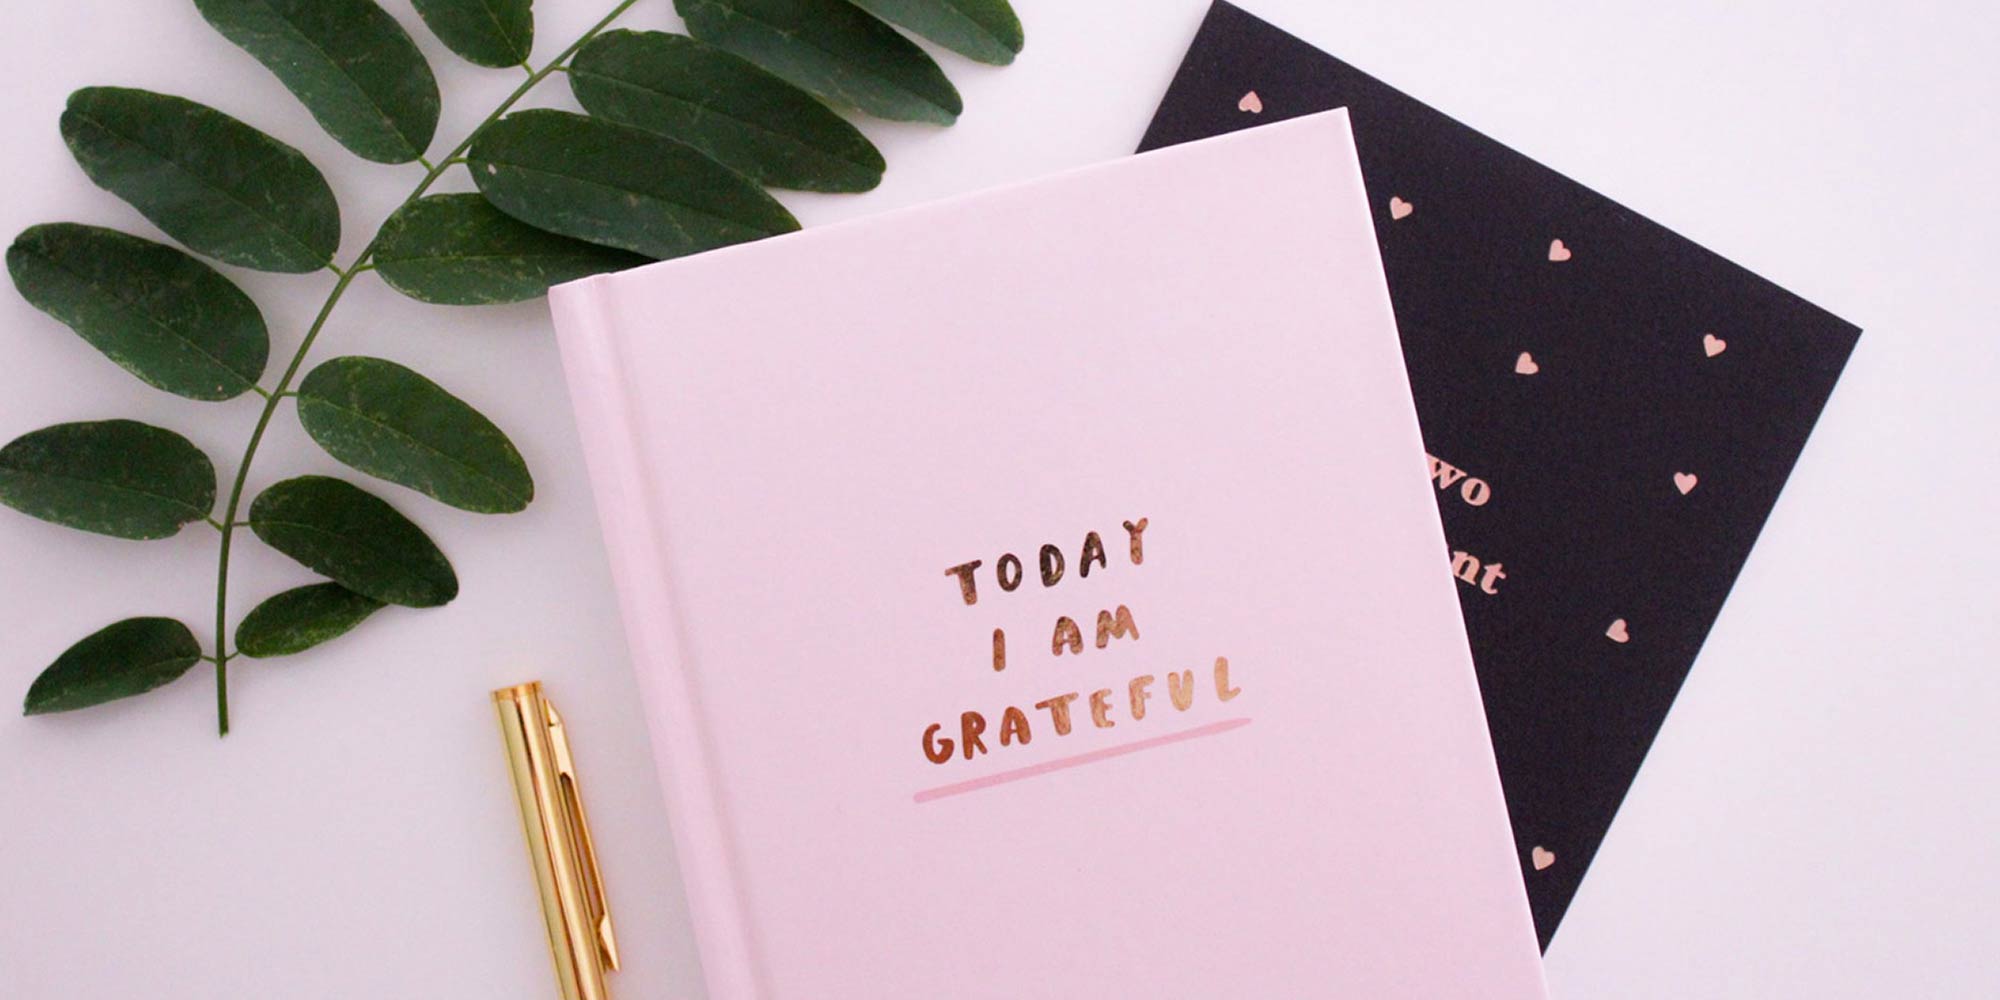 Gratitude journals and greenery on a pink background